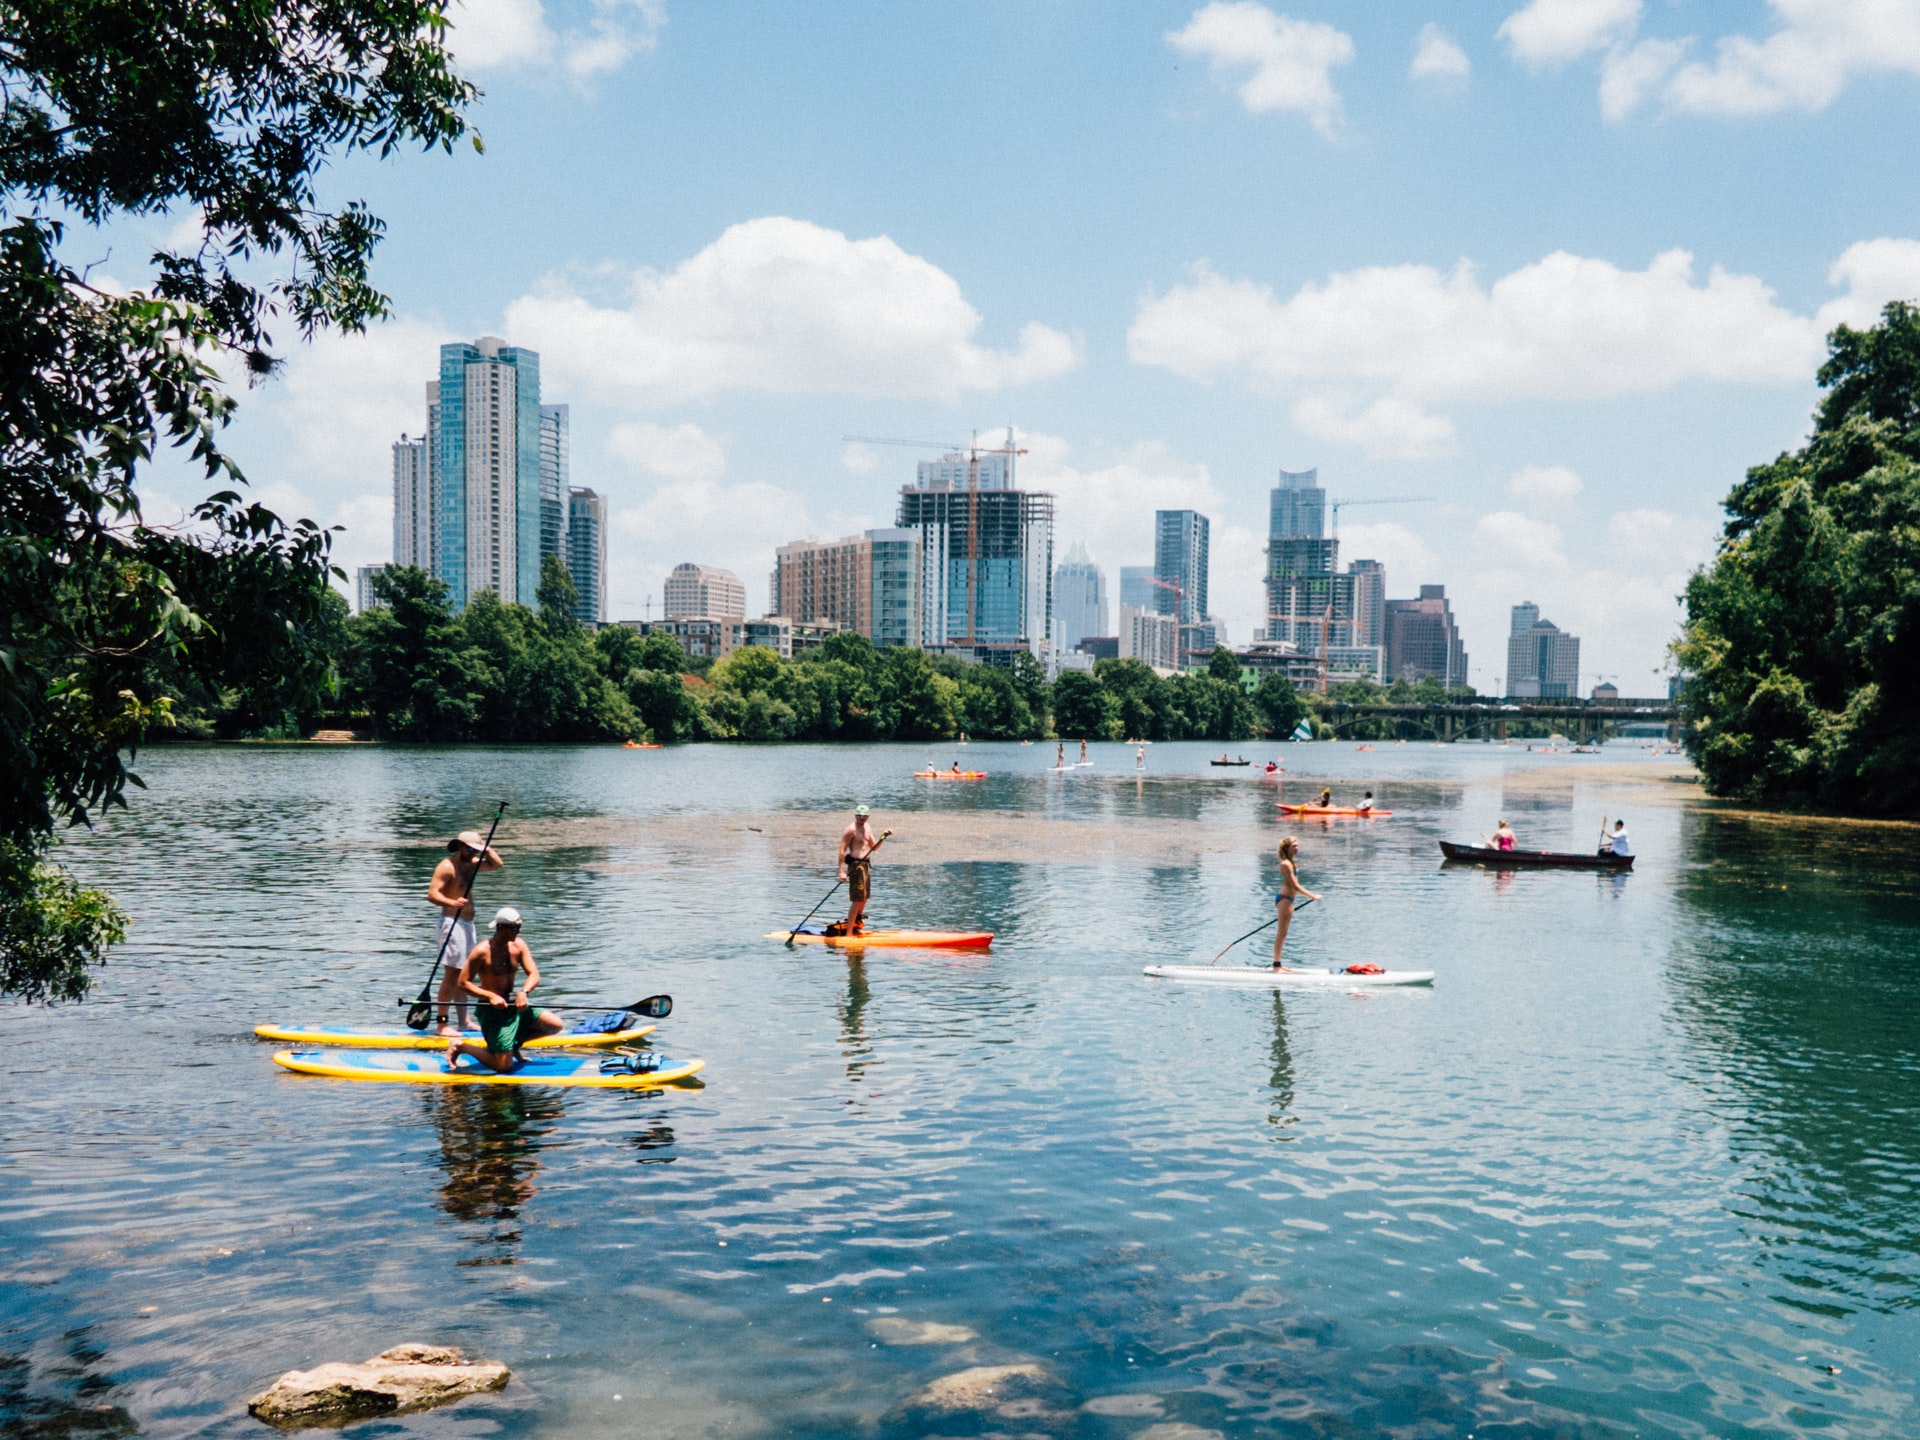 Why Austin is a famous city for the CBD industry